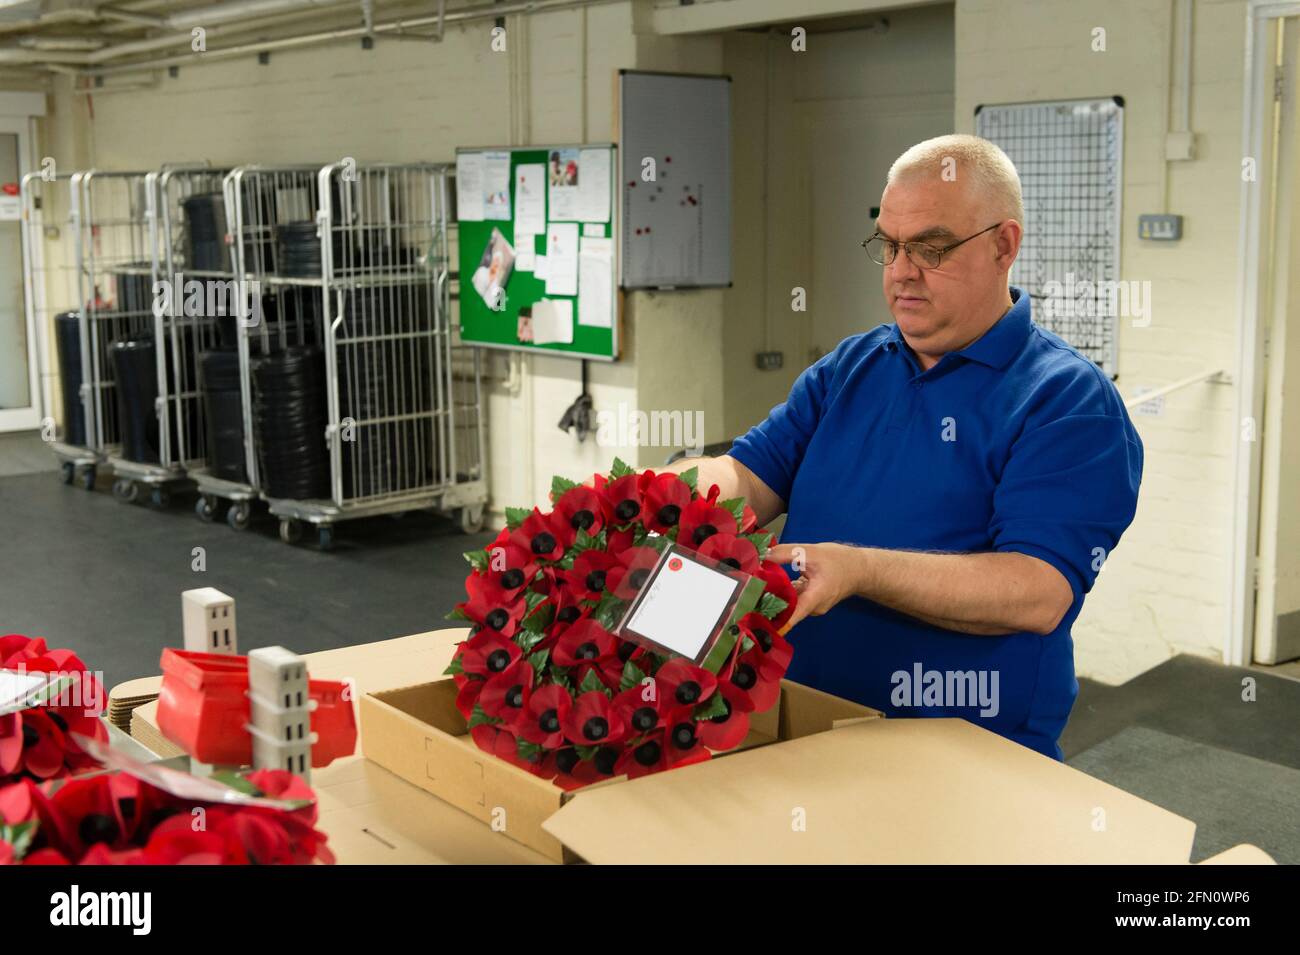 Paul Hammerton packing wreaths at, The Royal British Legion's Poppy Factory, 20 Petersham Road, Richmond, London, UK. The Poppy Factory employs ex-service personnel to makes poppies, remembrance crosses, sprays and wreaths for The Royal British Legion’s annual Appeal and Remembrance Day. The Poppy Factory is also responsible for planting and hosting The Field of Remembrance at Westminster Abbey. The Royal British Legion's Poppy Factory, 20 Petersham Road, London, UK.  16 Oct 2013 Stock Photo